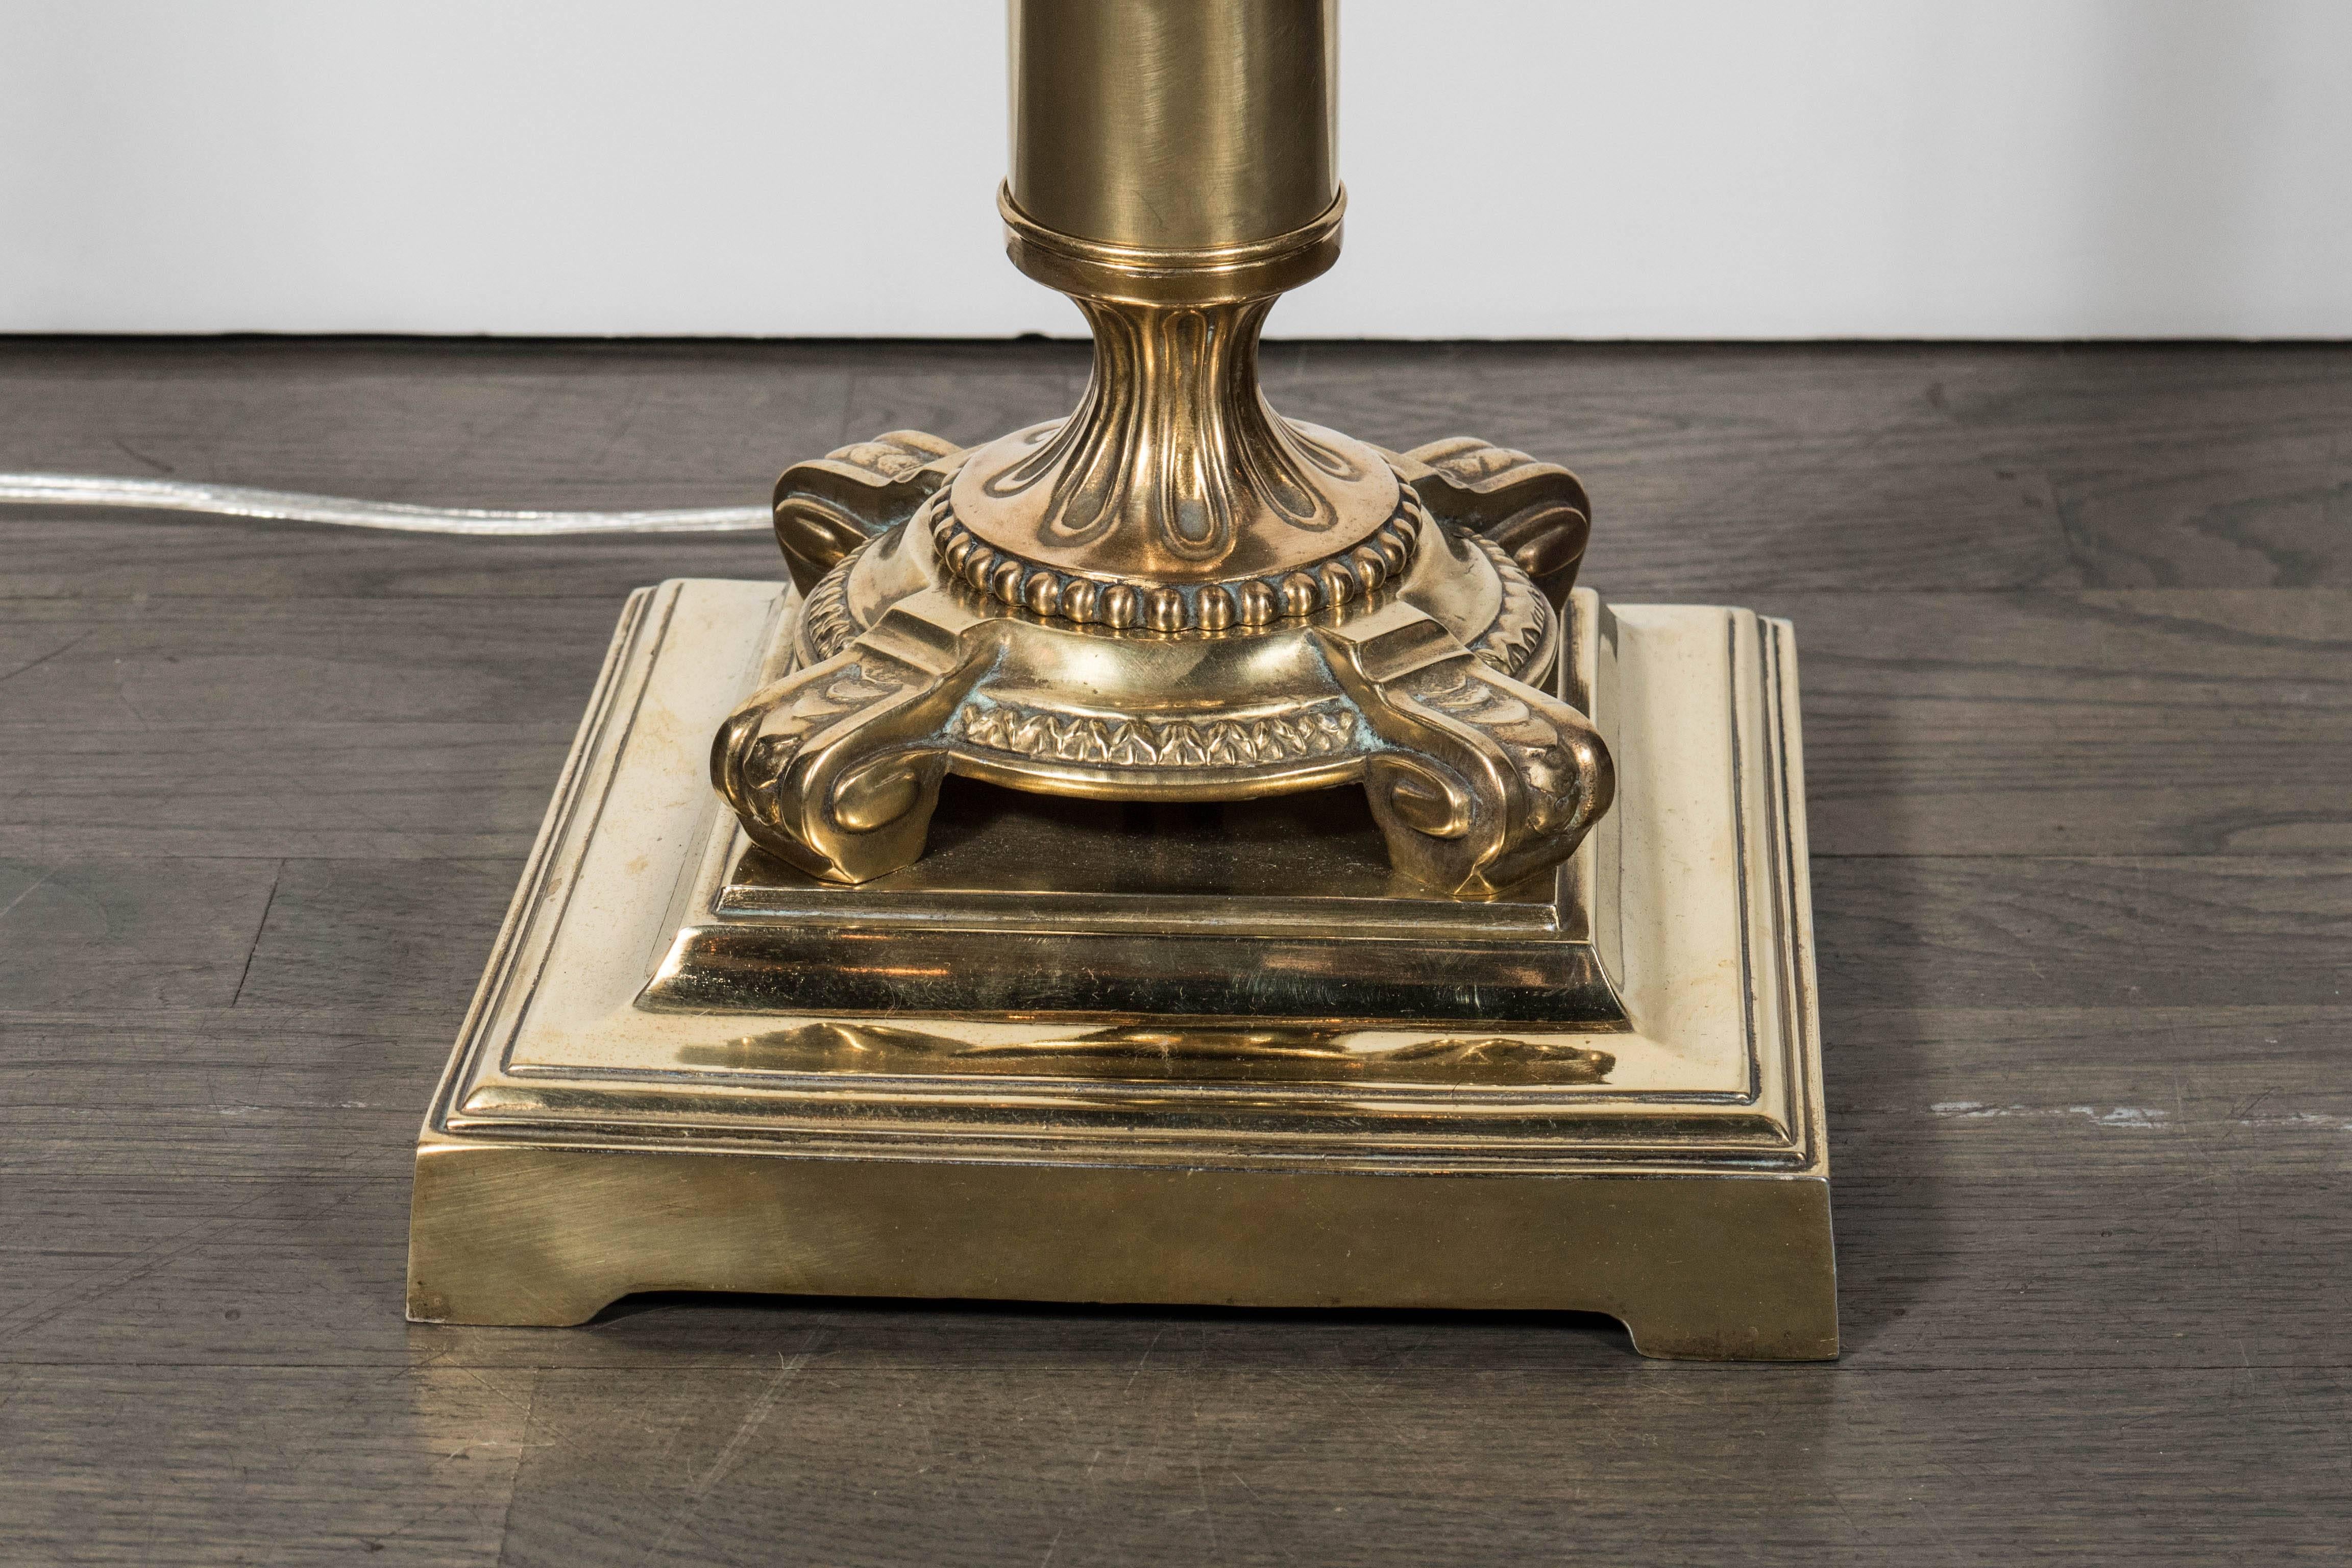 American Stunning Art Deco Brass and Glass Floor Lamp with Neoclassical Details